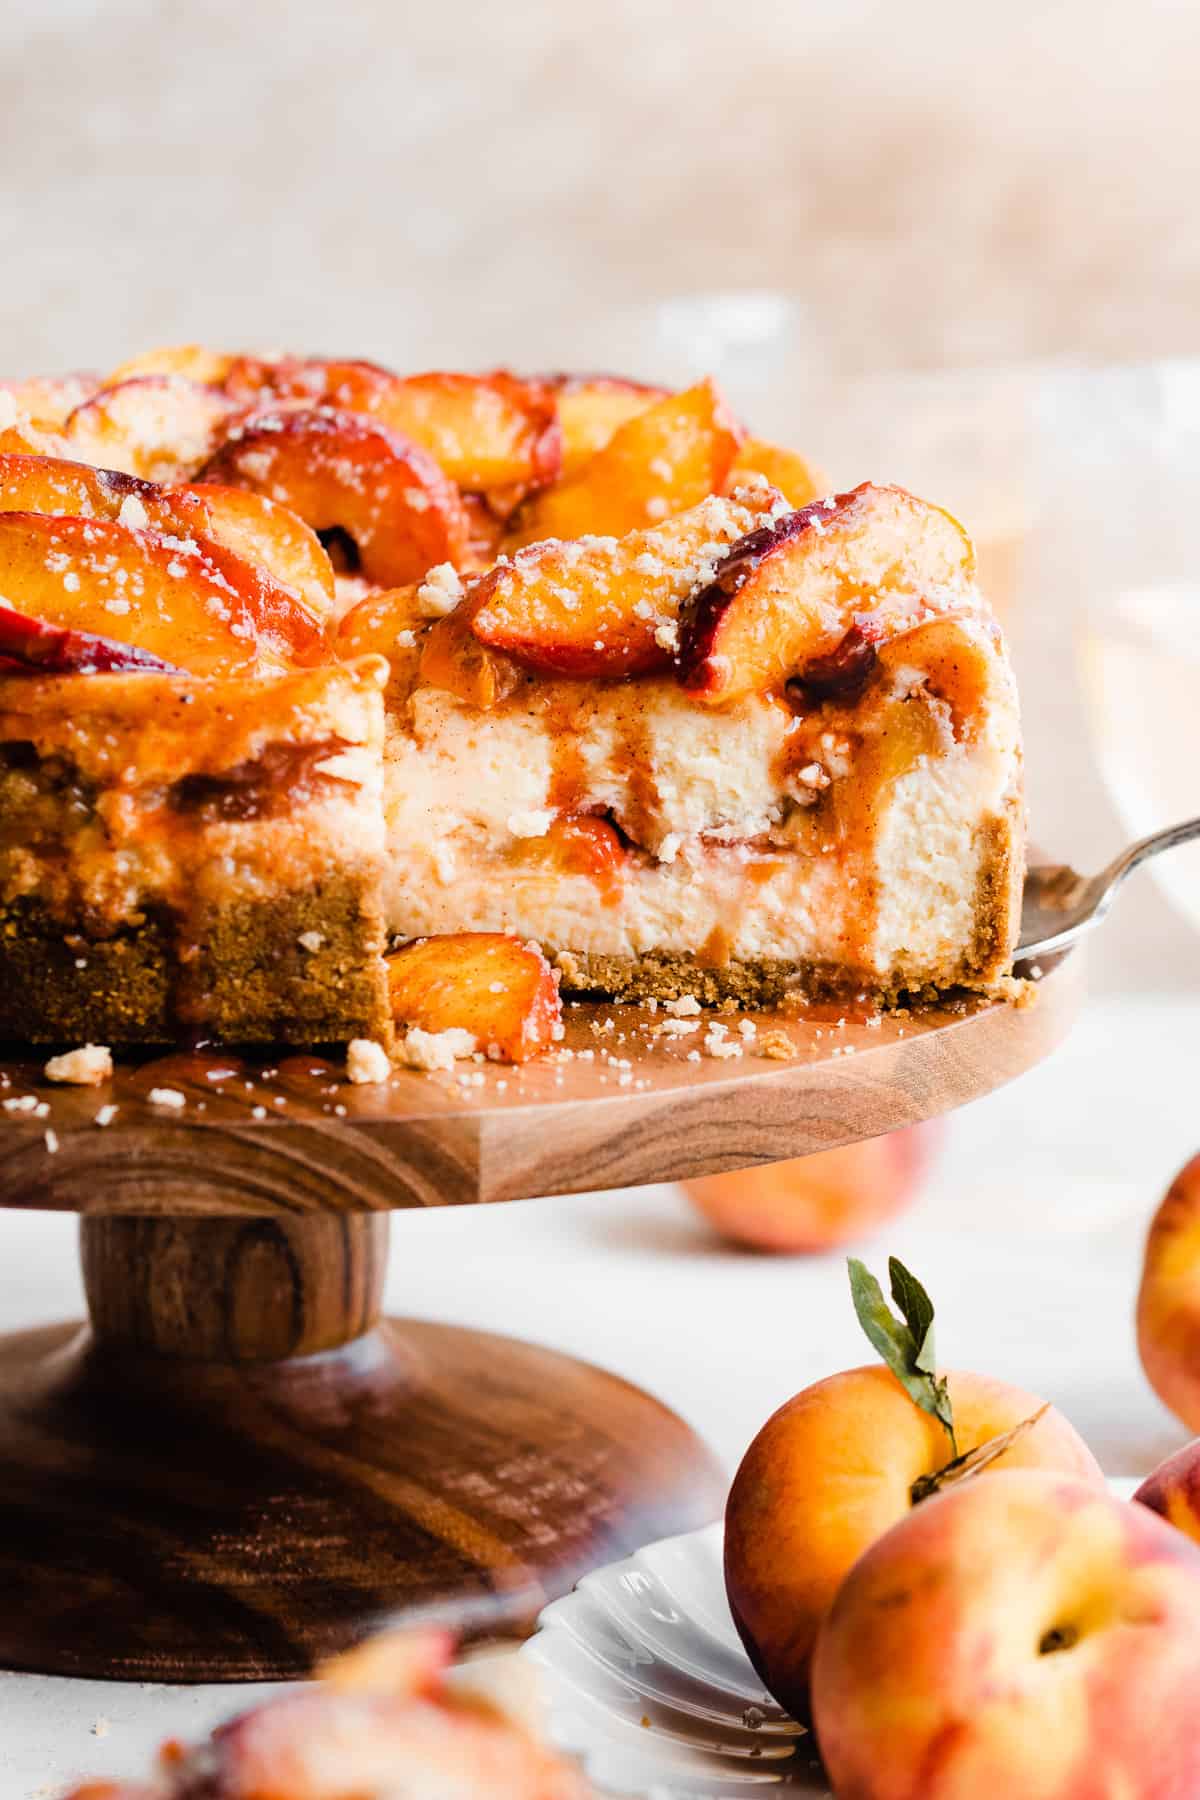 The peach cobbler cheesecake on a cake stand with a cross section cut. Juicy peach slices are on top with cinnamon peach juice dripping down.